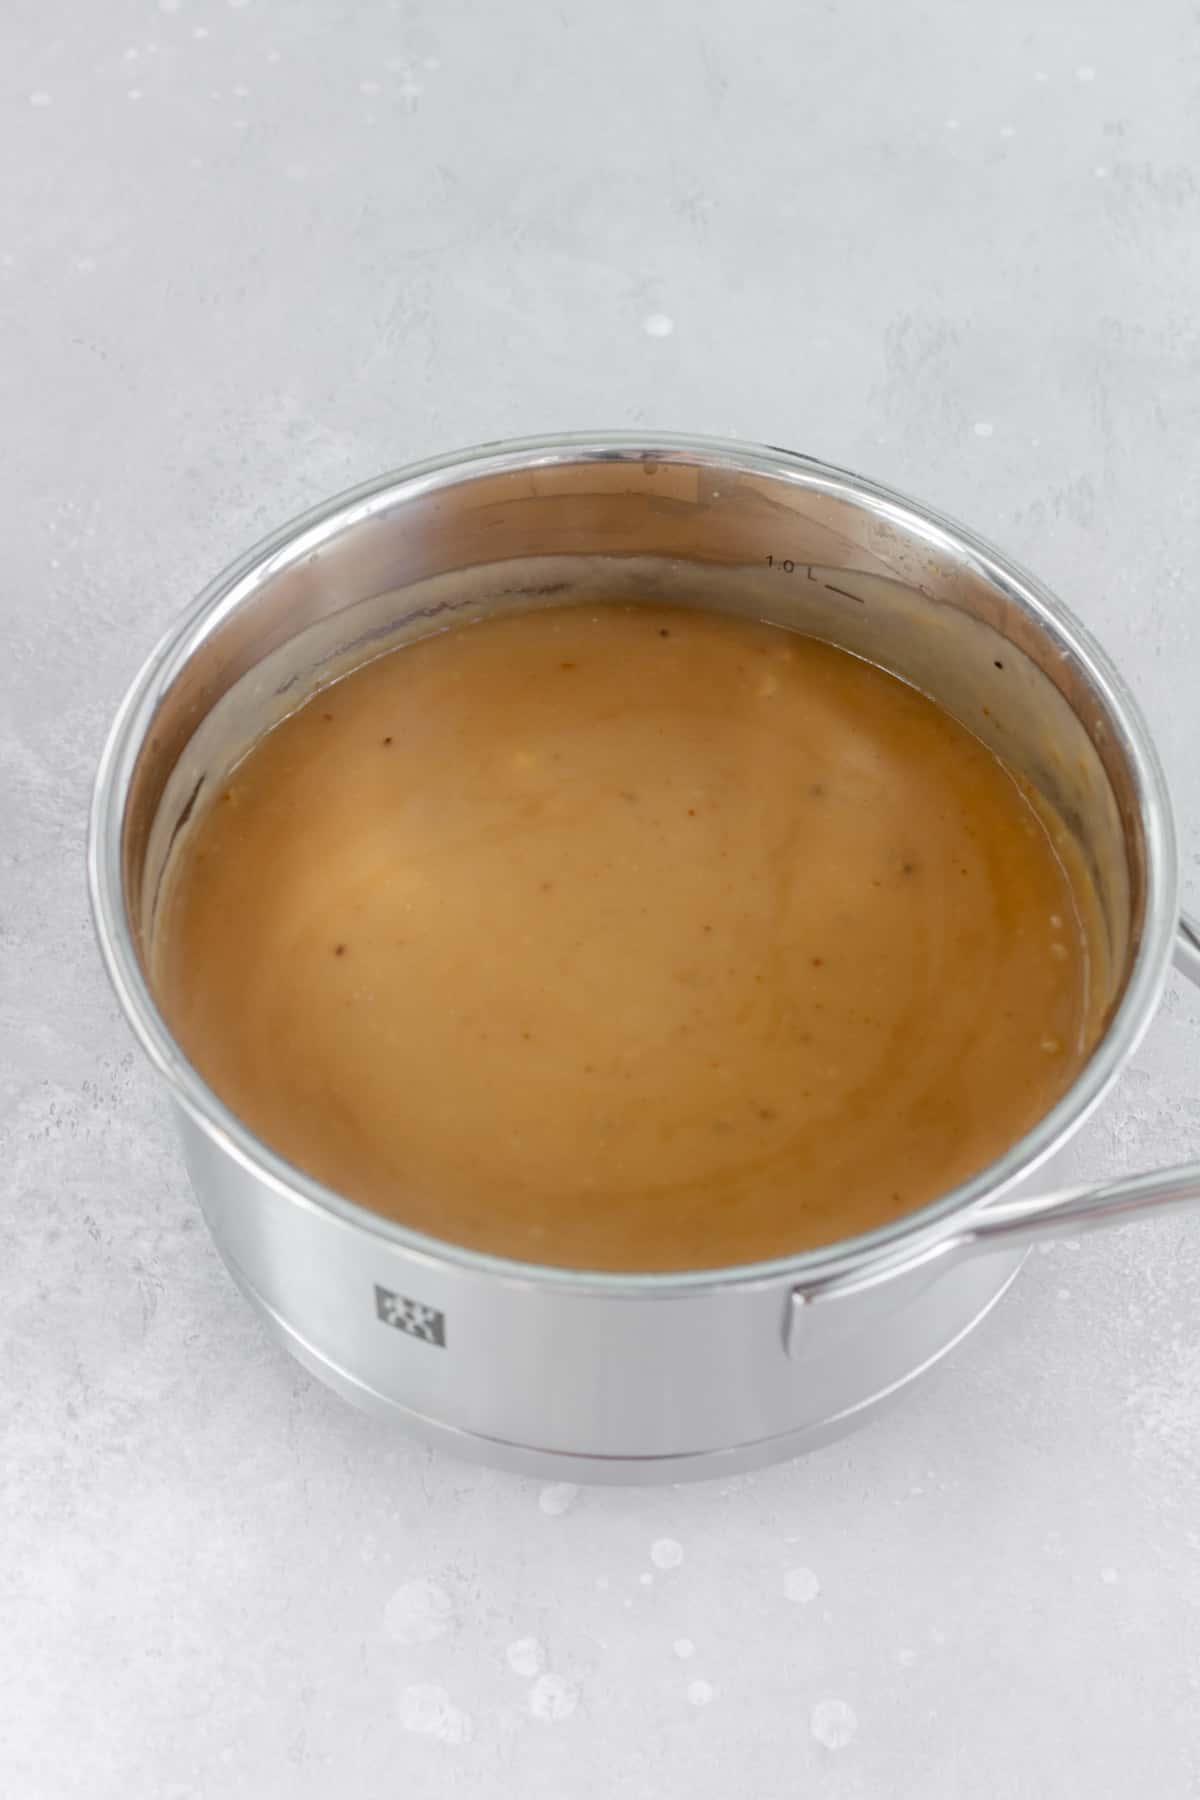 A pot of brown gravy made without drippings.